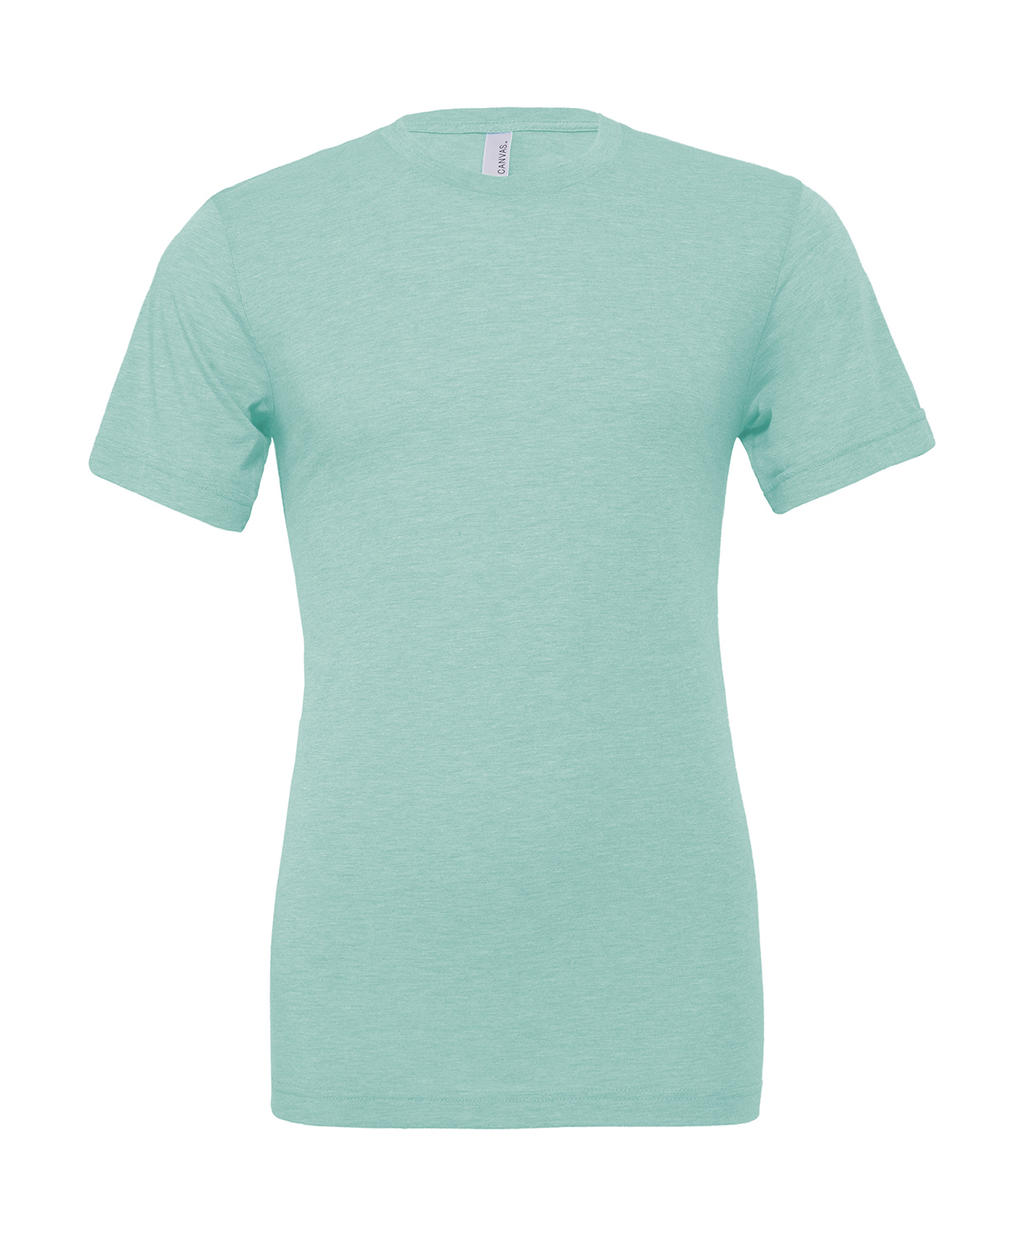  Unisex Triblend Short Sleeve Tee in Farbe Dusty Blue Triblend